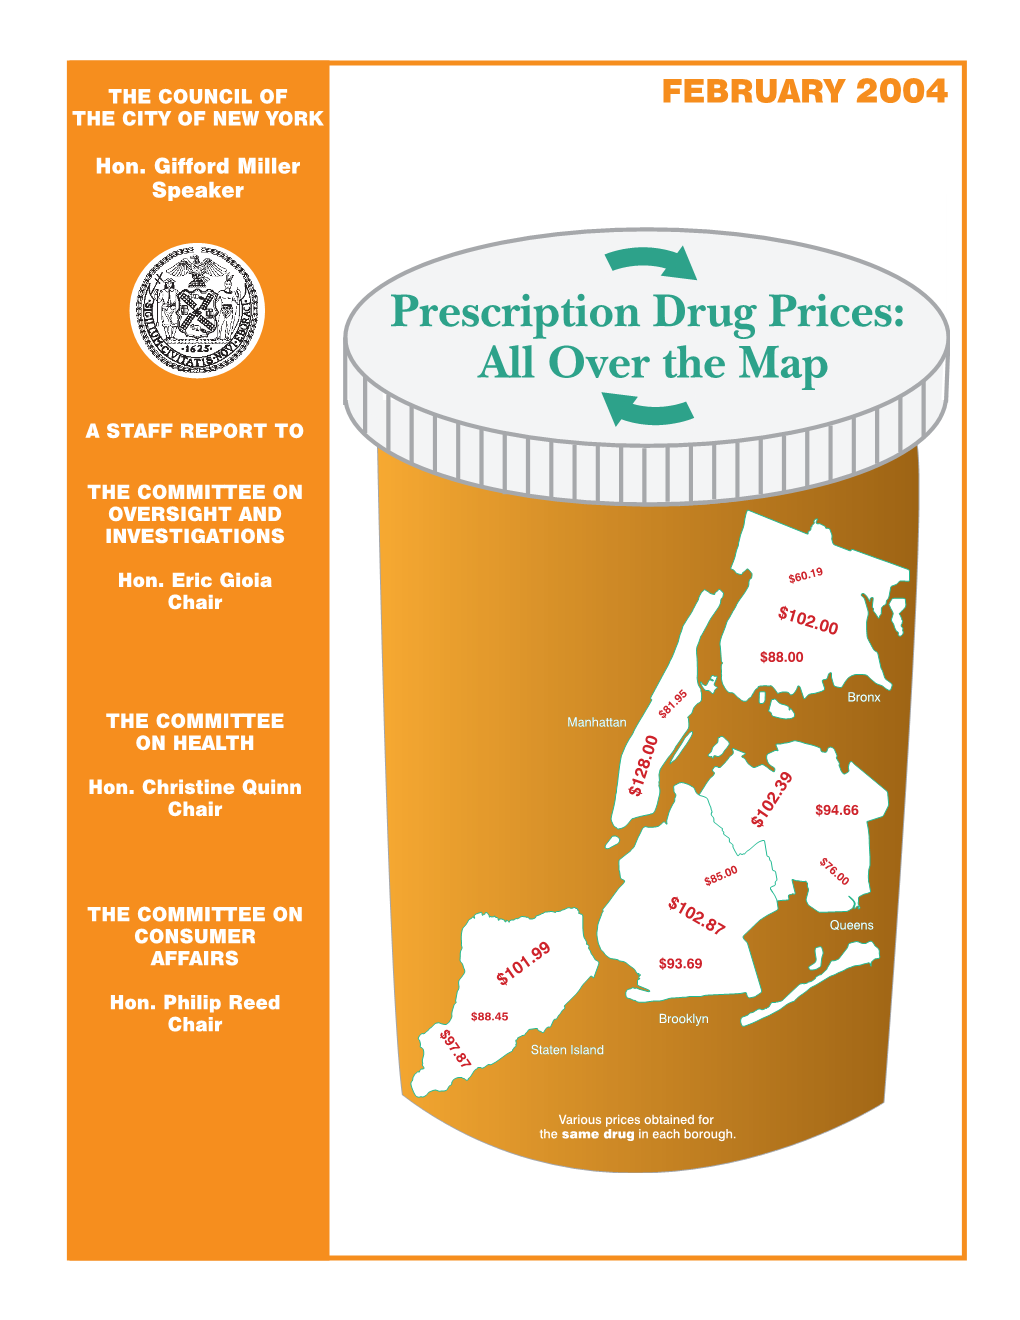 Prescription Drug Prices: All Over the Map